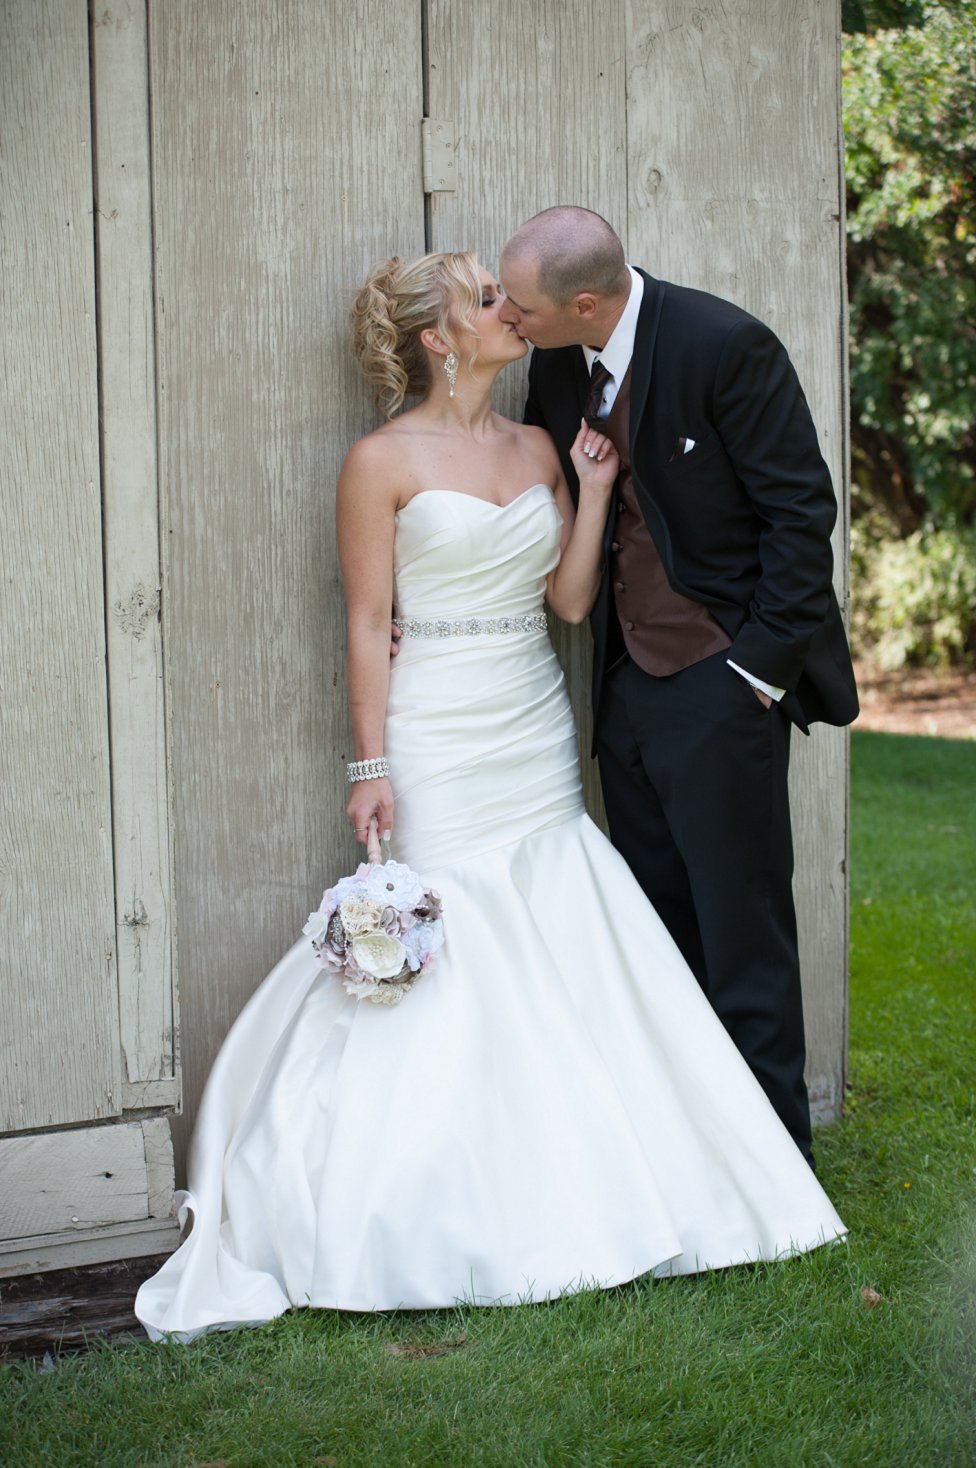 Vance and Courtney {married} 787.jpg